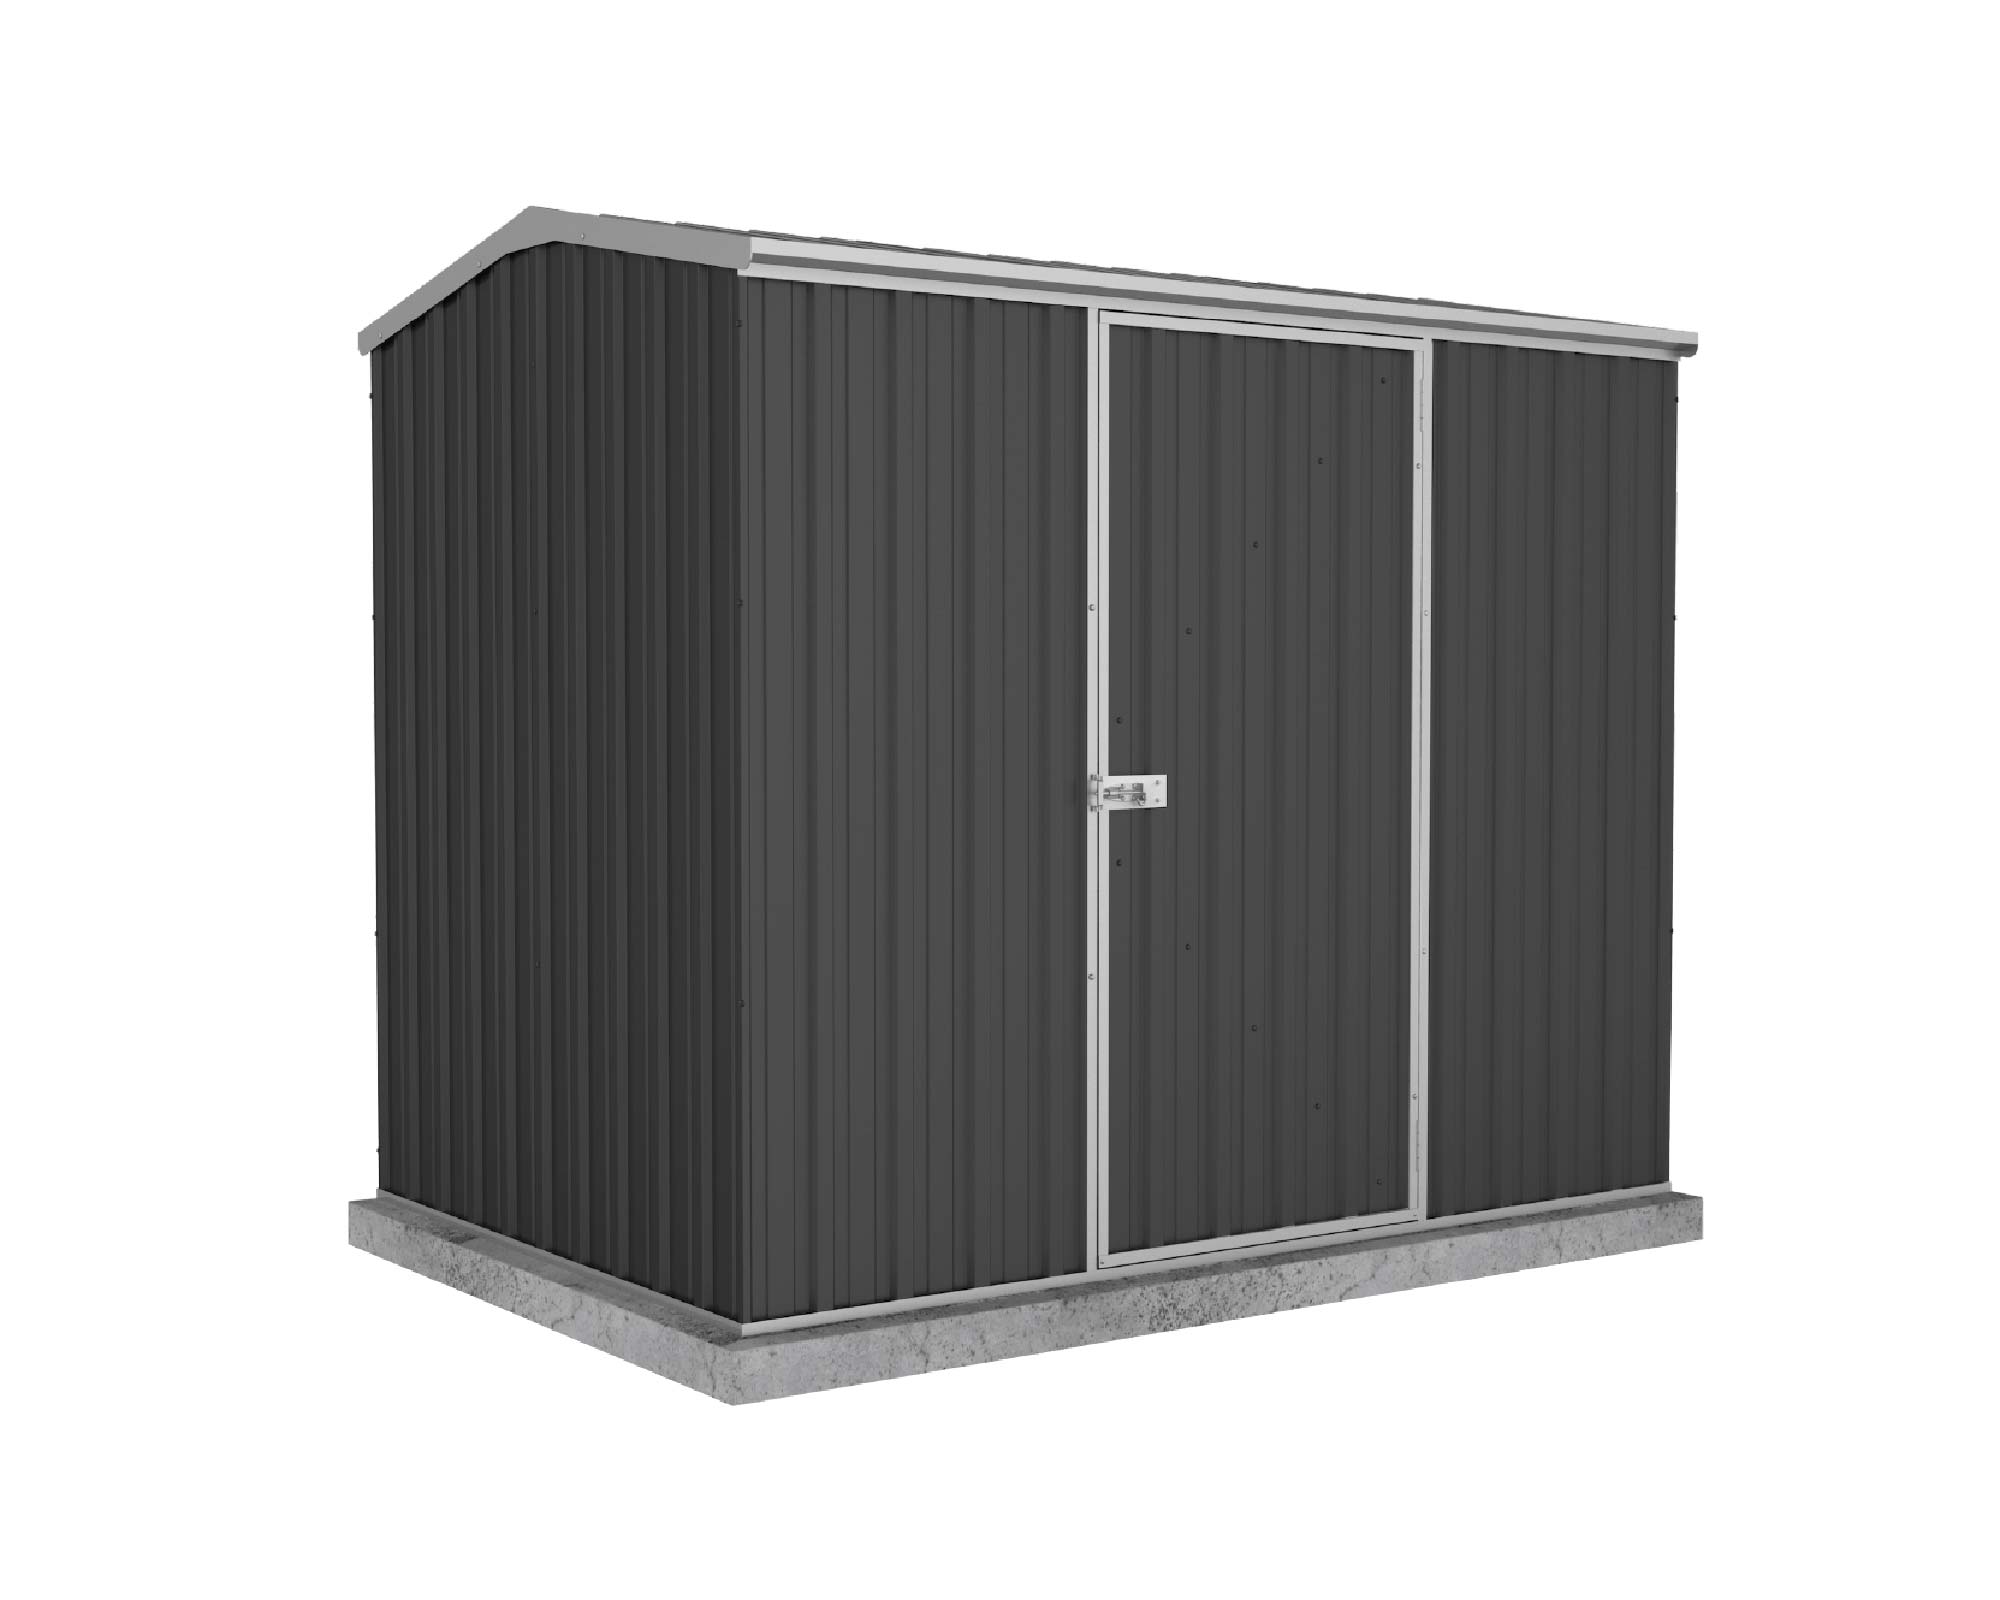 Premier Garden Shed with Single Door Kit - 2.26 x 1.52 x 2.08m ABSCO in Monument